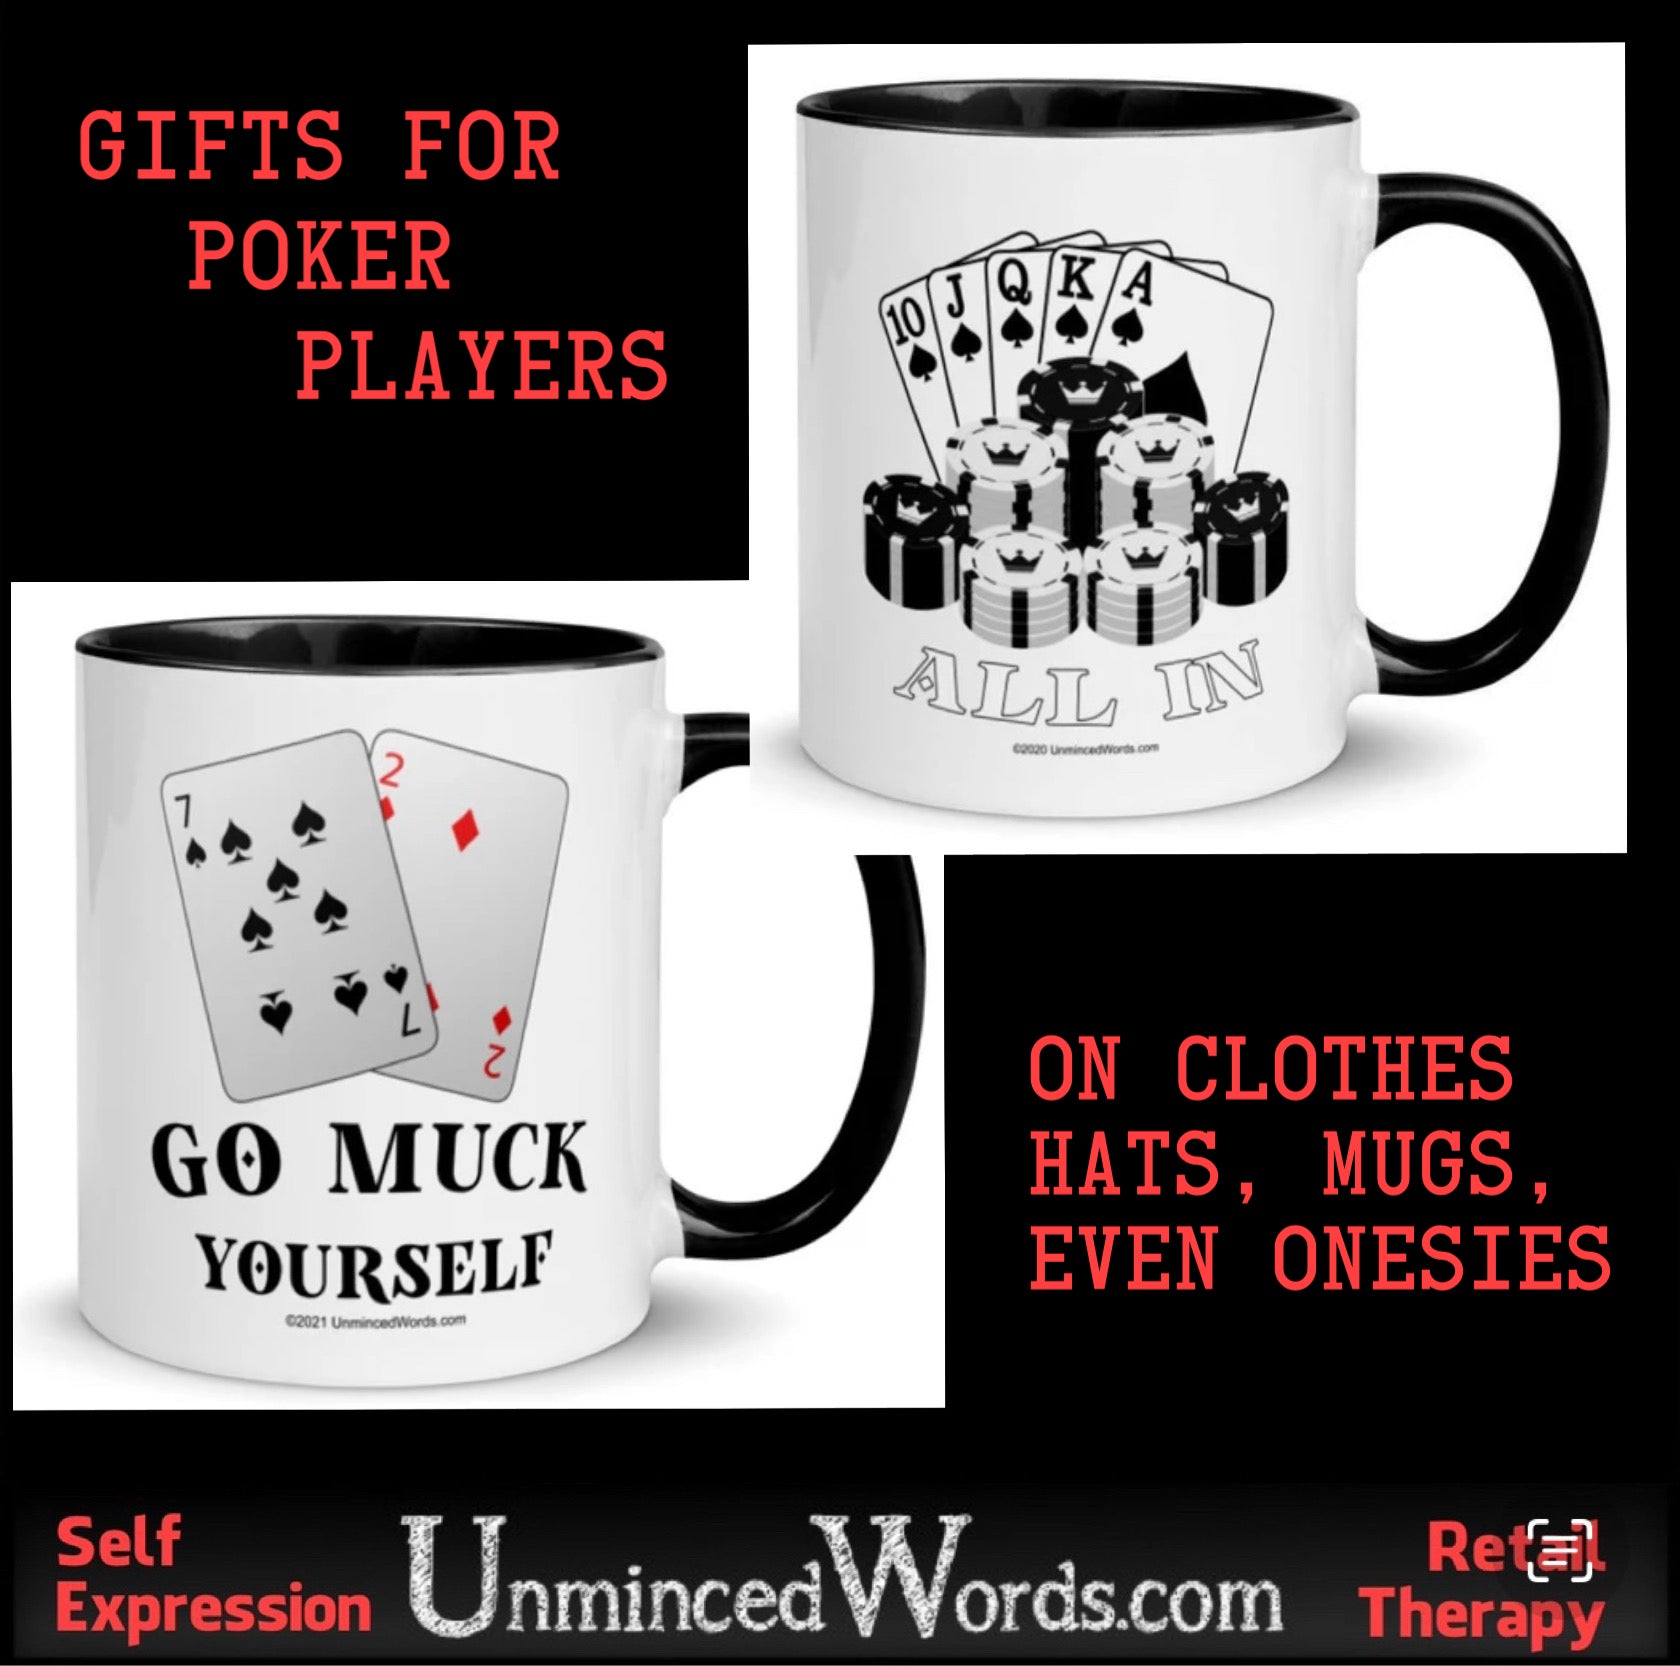 Gifts for poker players.